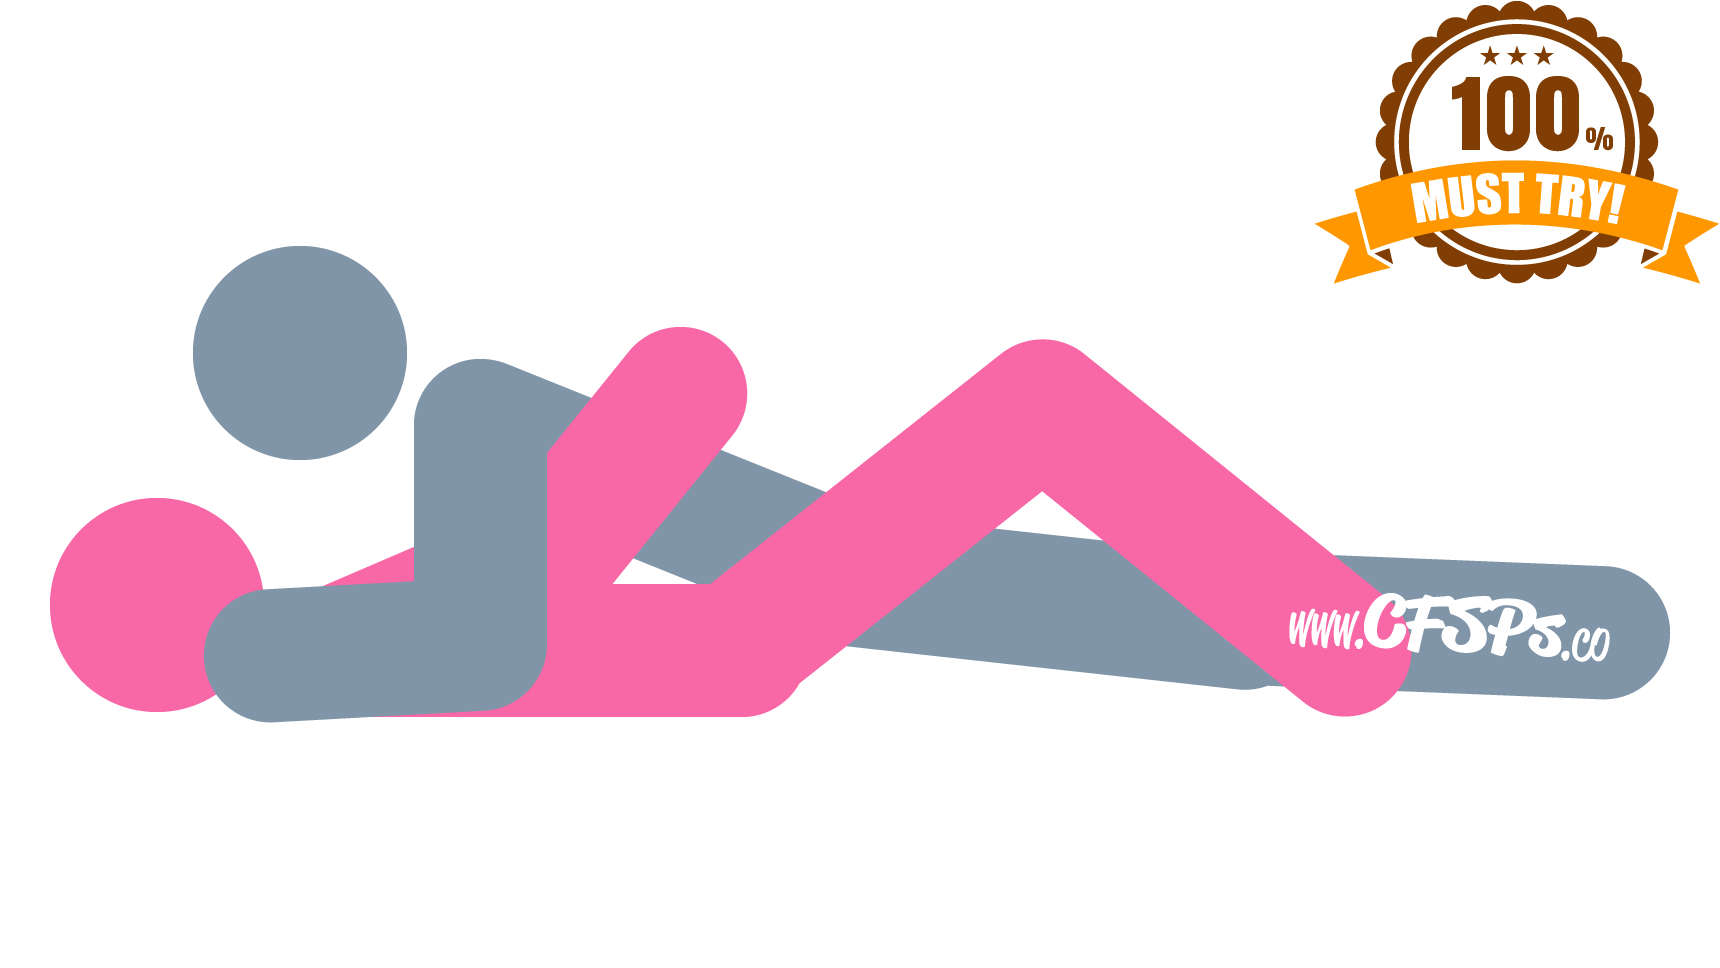 This image depicts a man and woman having sex in the missionary sex position using a stick figure drawing. The woman is lying on her back, and the man is lying on top of her between her legs.